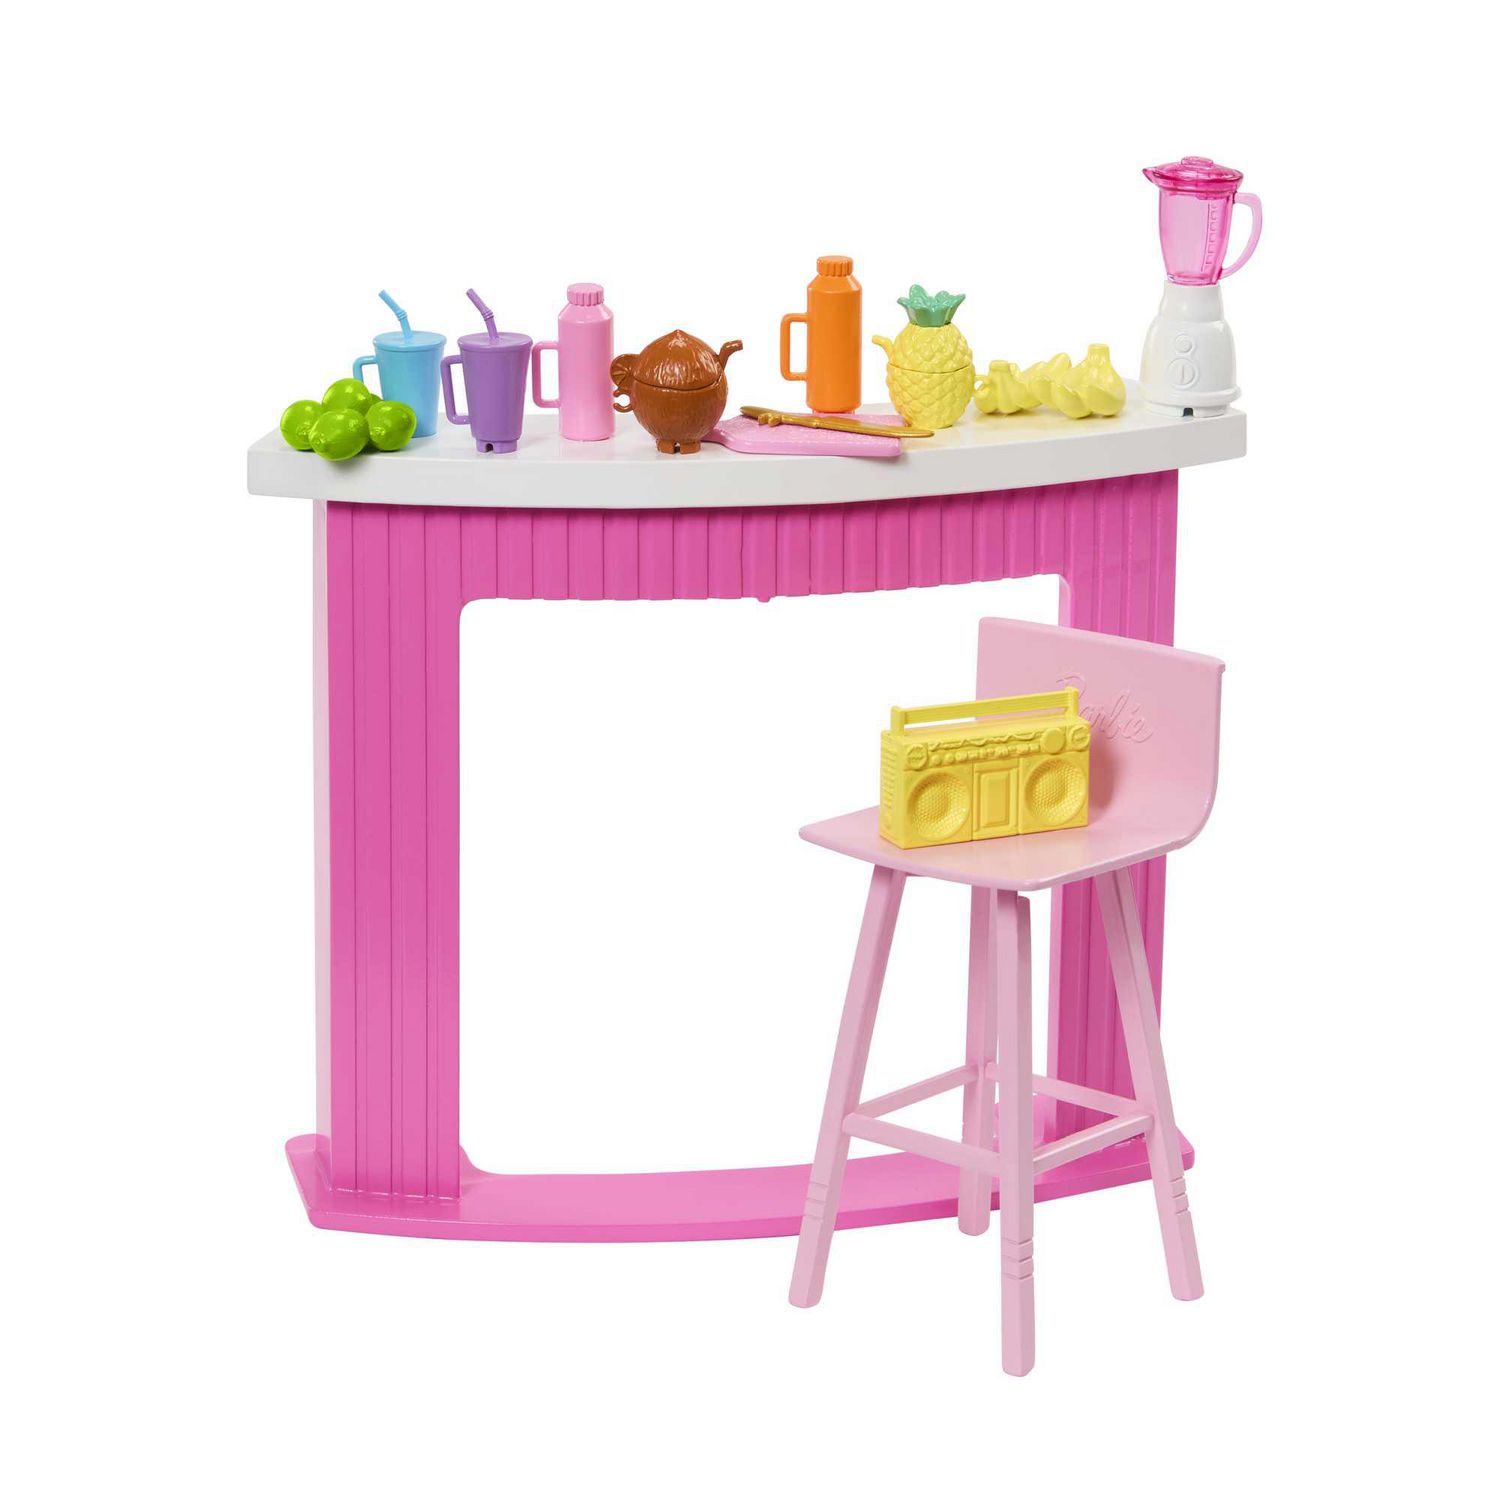 Barbie Accessories, Doll House Furniture, Smoothie Bar Story